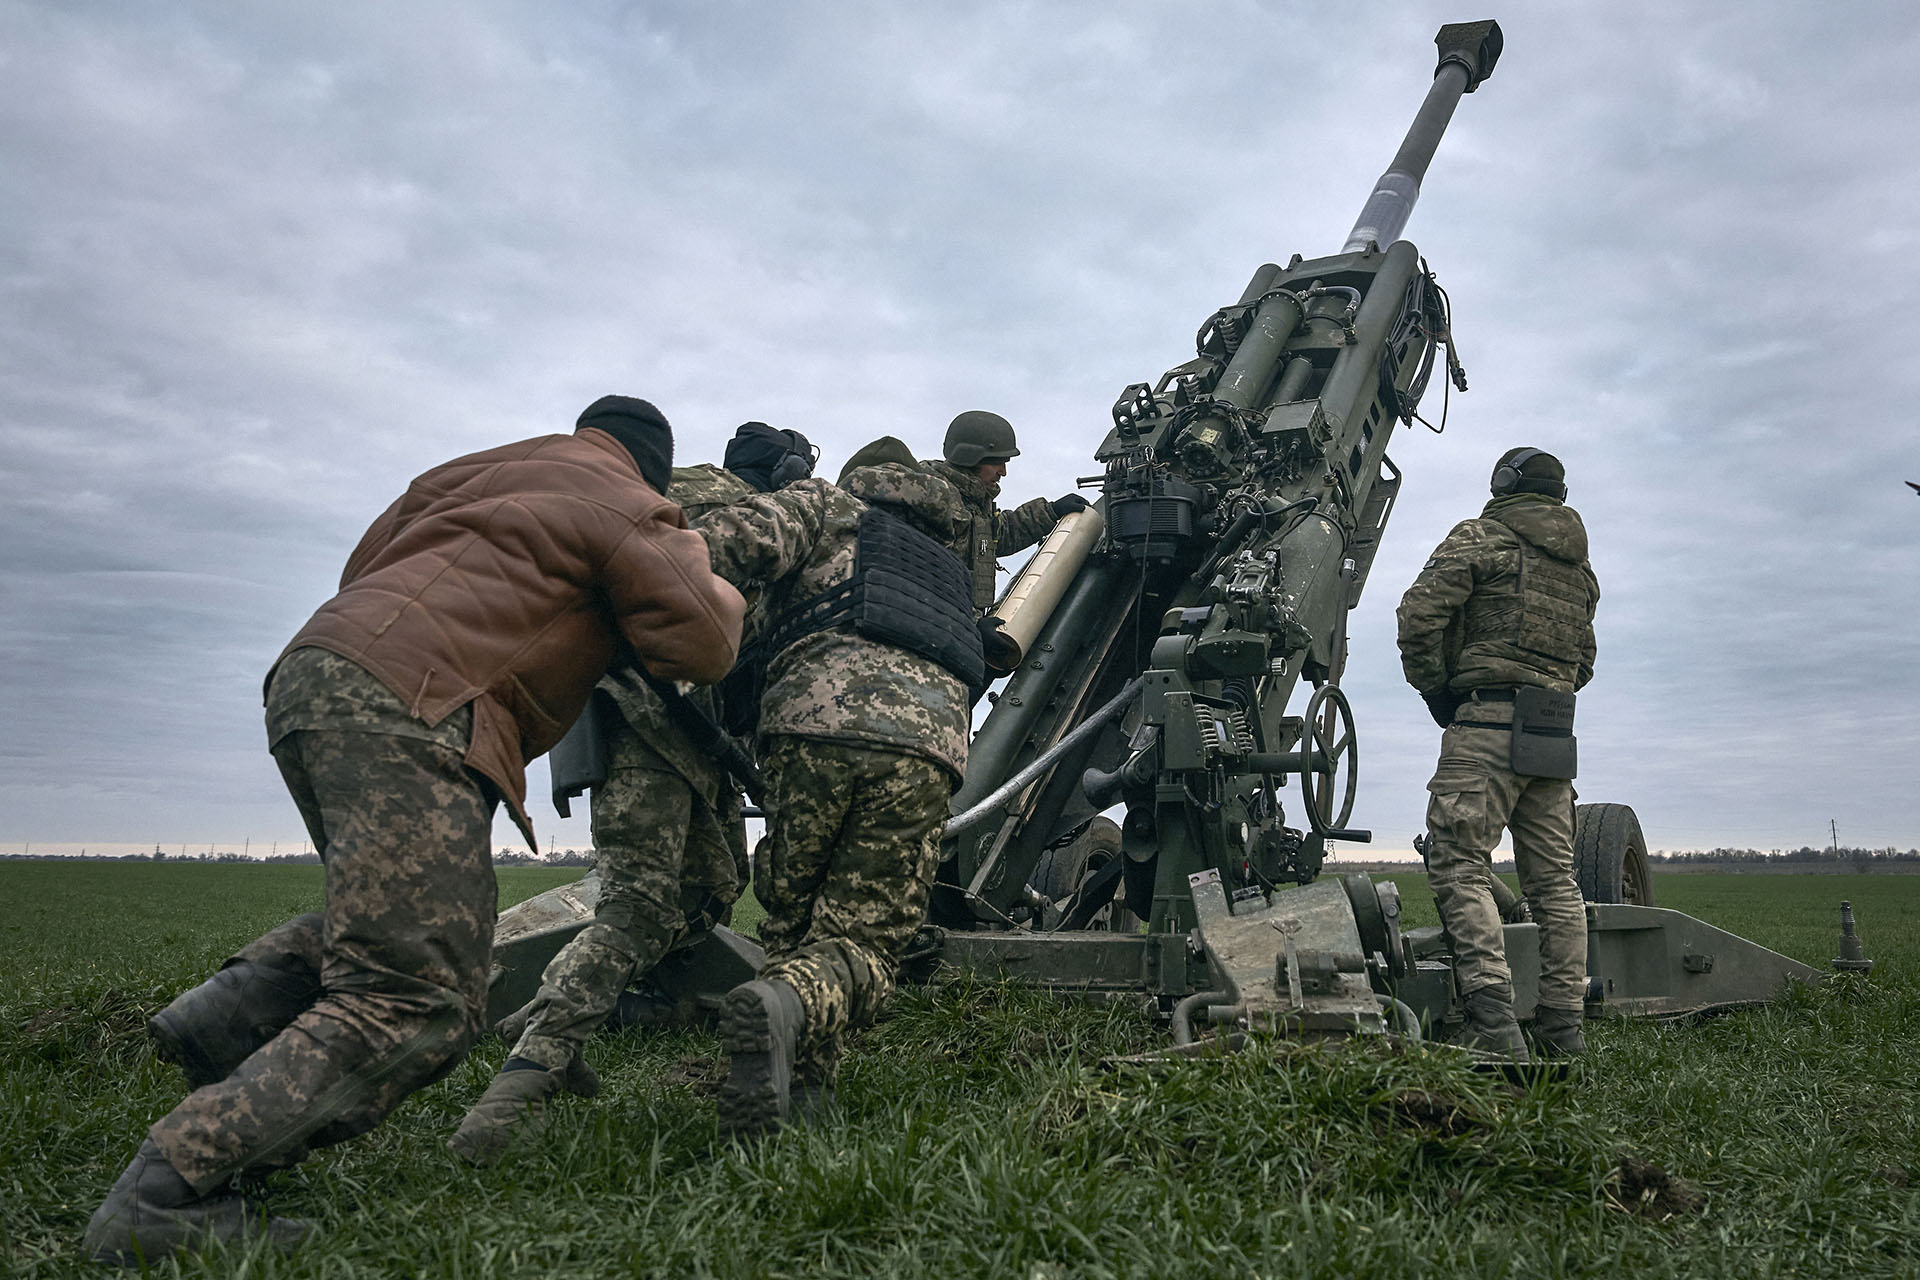 Ukrainian soldiers prepare a US-supplied M777 howitzer to fire on Russian positions in the Kherson region of Ukraine on January 9, 2023. (AP Photo/Libkos)